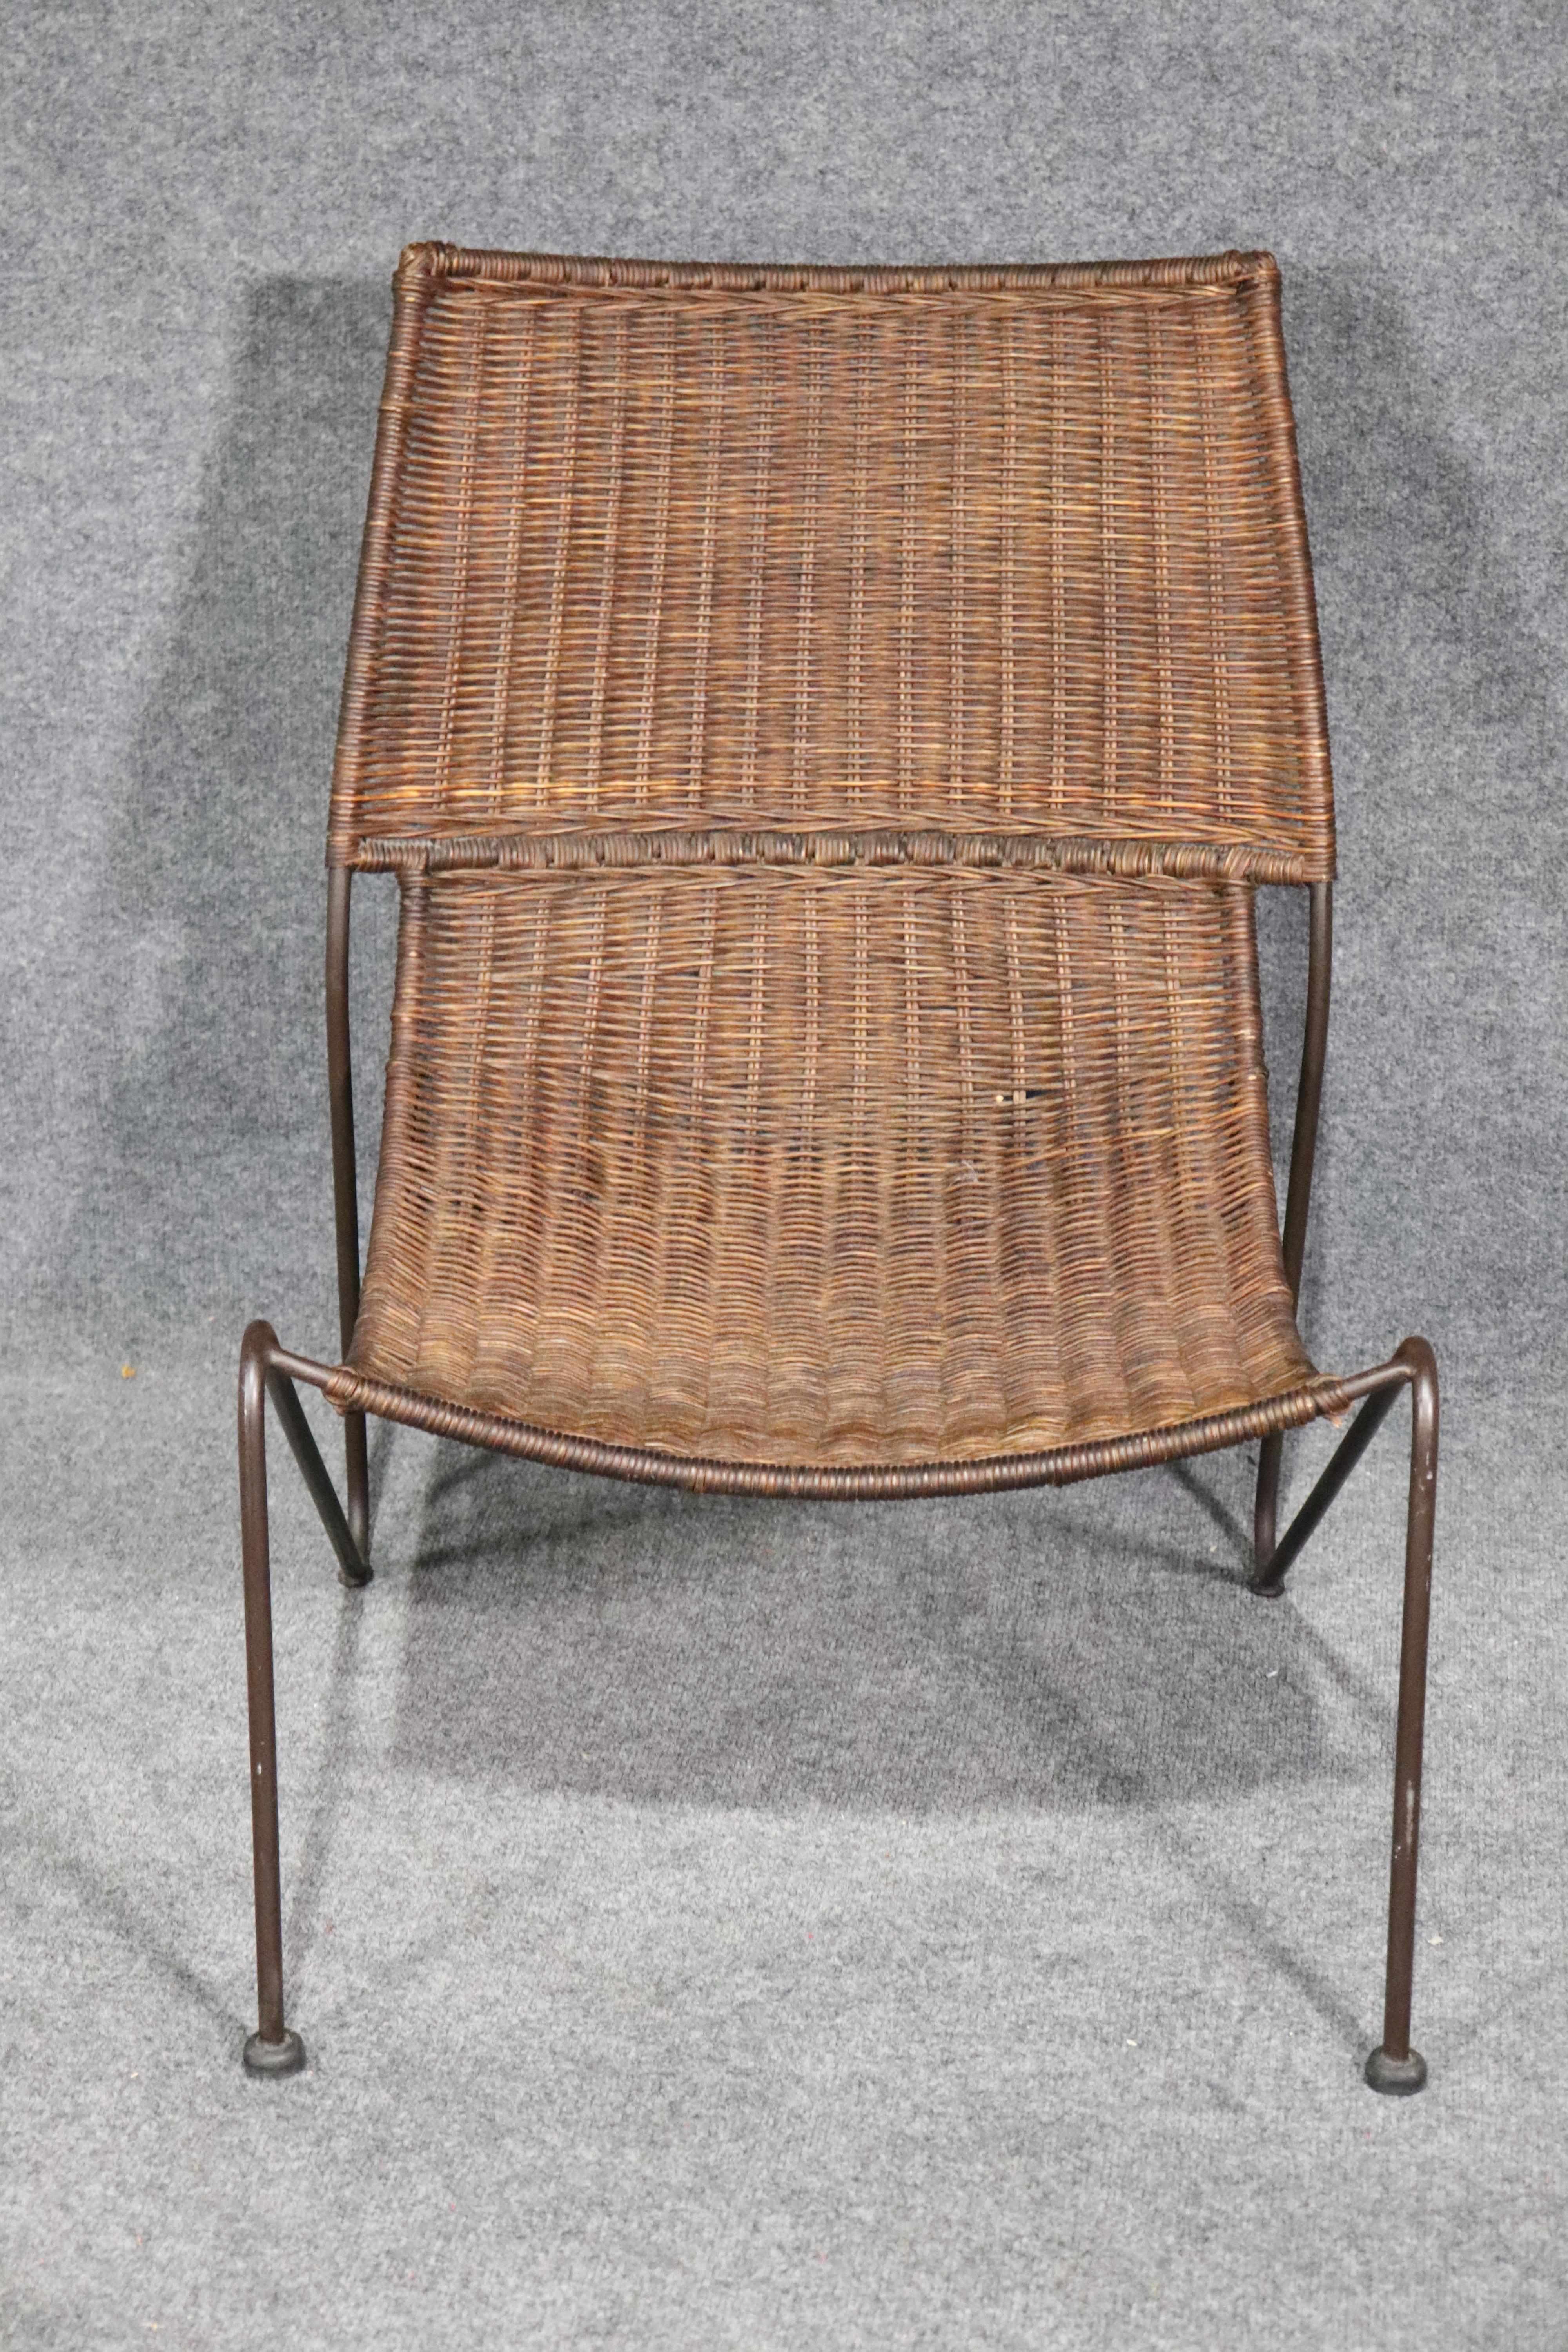 Single lounge chair for indoor or outdoor use. Designed by Frederick Weinberg with woven wicker seat and back on a sturdy iron frame.
Please confirm location.